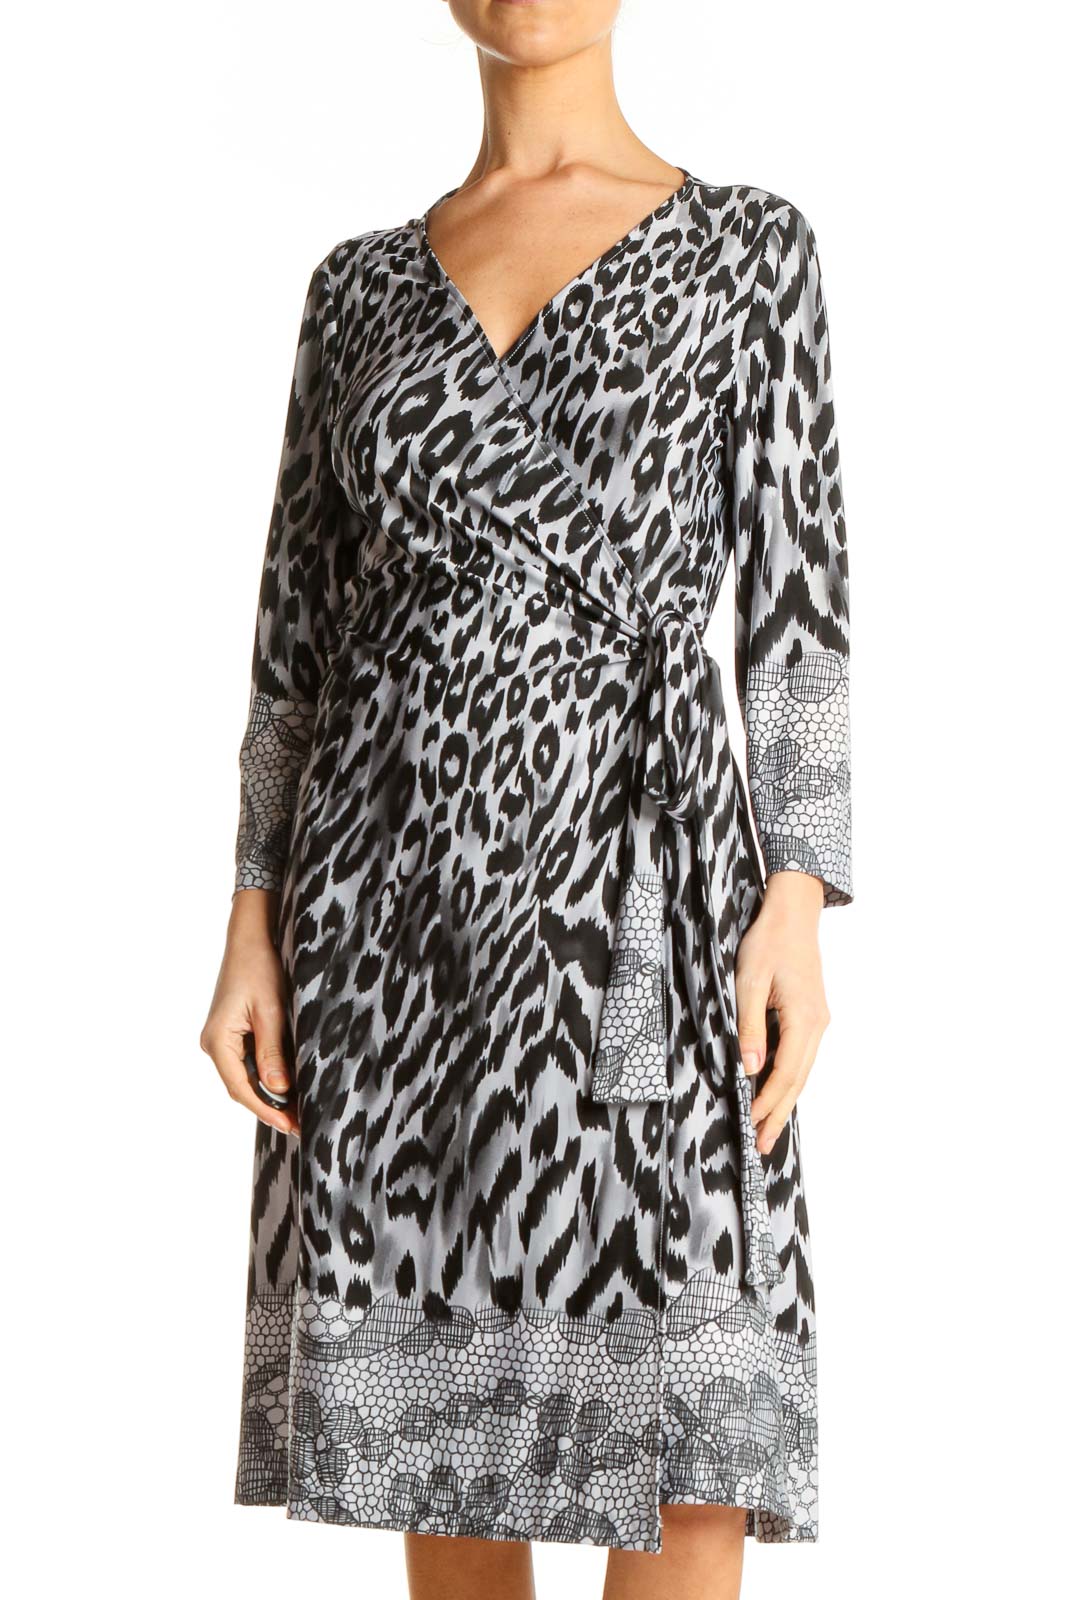 Gray Animal Print Fit & Flare Wrap Dress Front